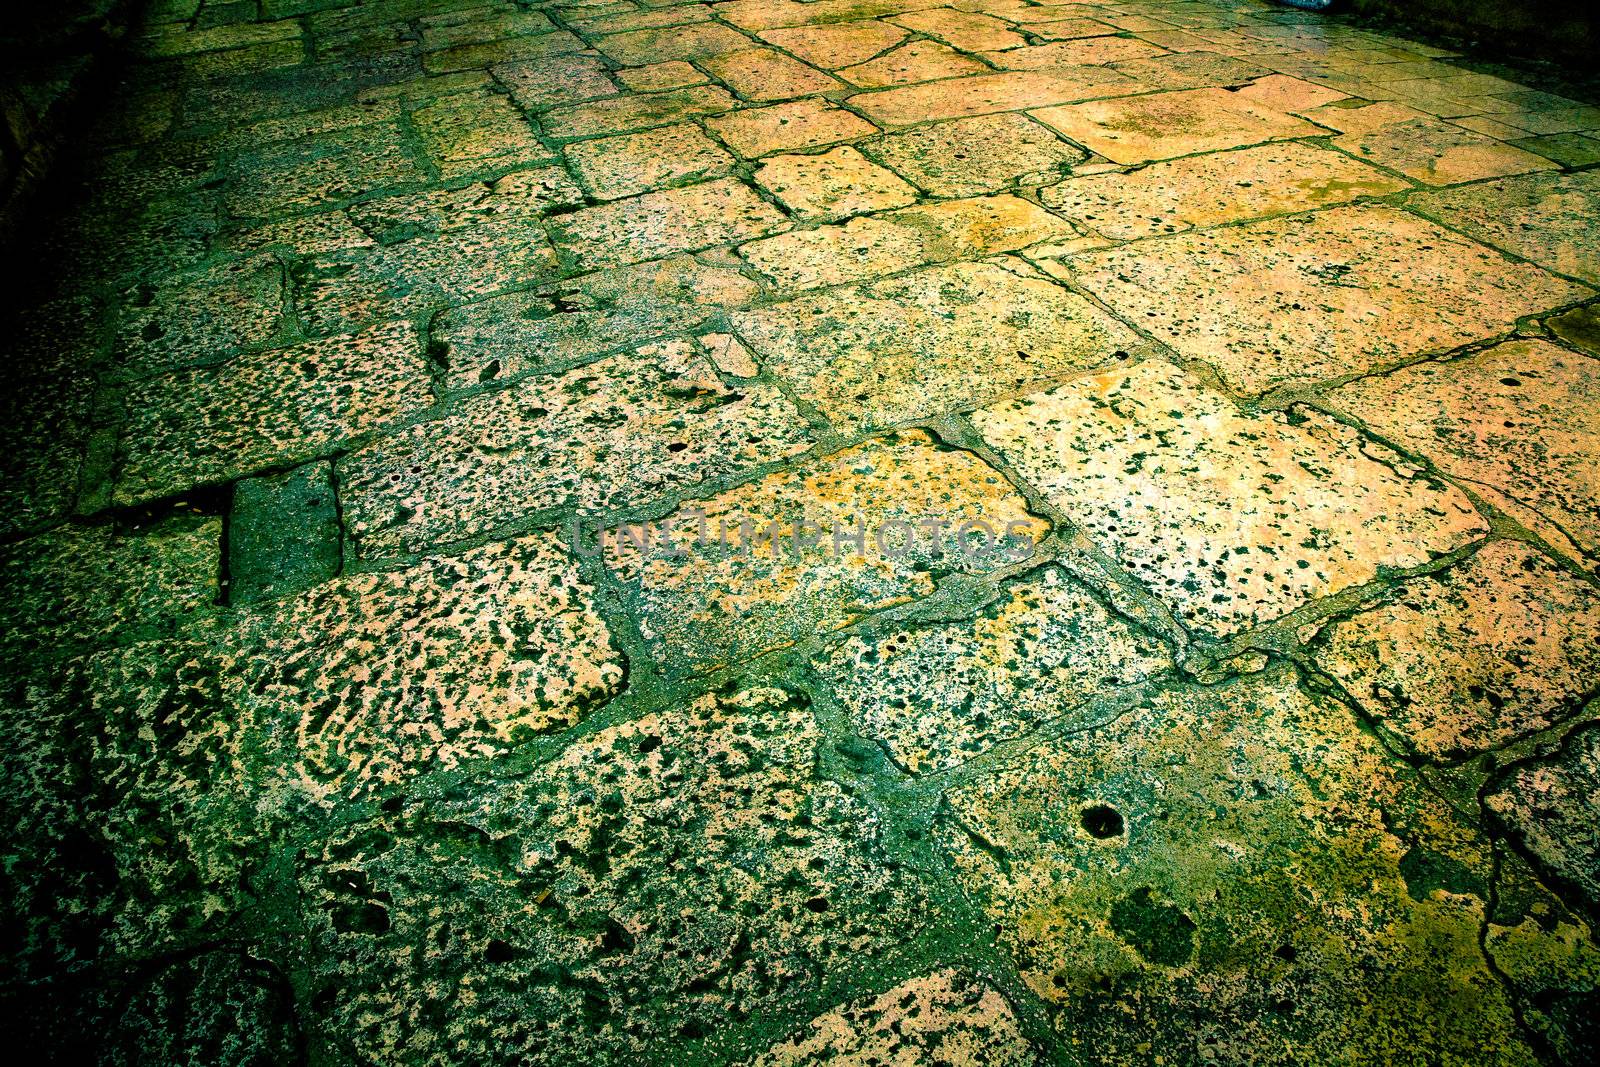 Dream of Split. Artistic work to make an old dreamlike look. Marble stone in alley - Split, Croatia. Traces of several hundred years of daily use to be seen. Cross processed.